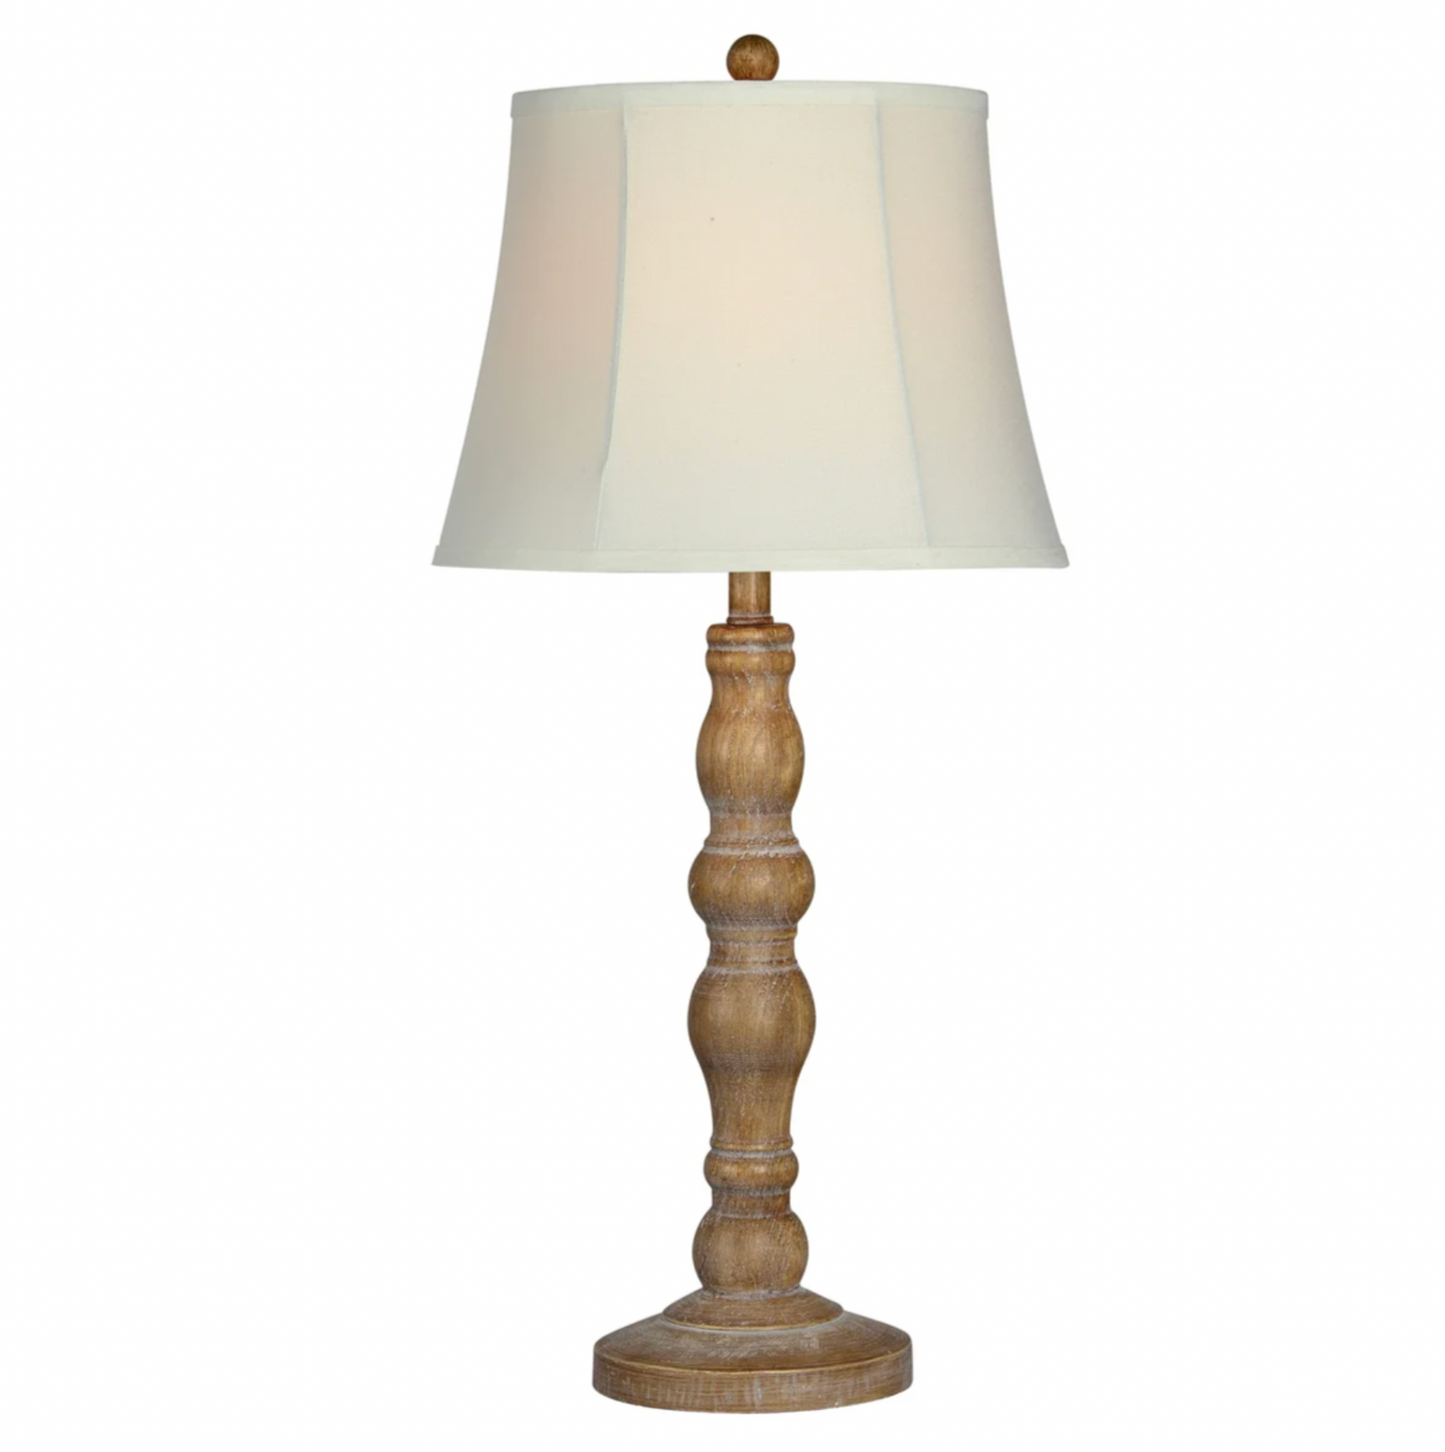 HOLLY HILL TABLE LAMP